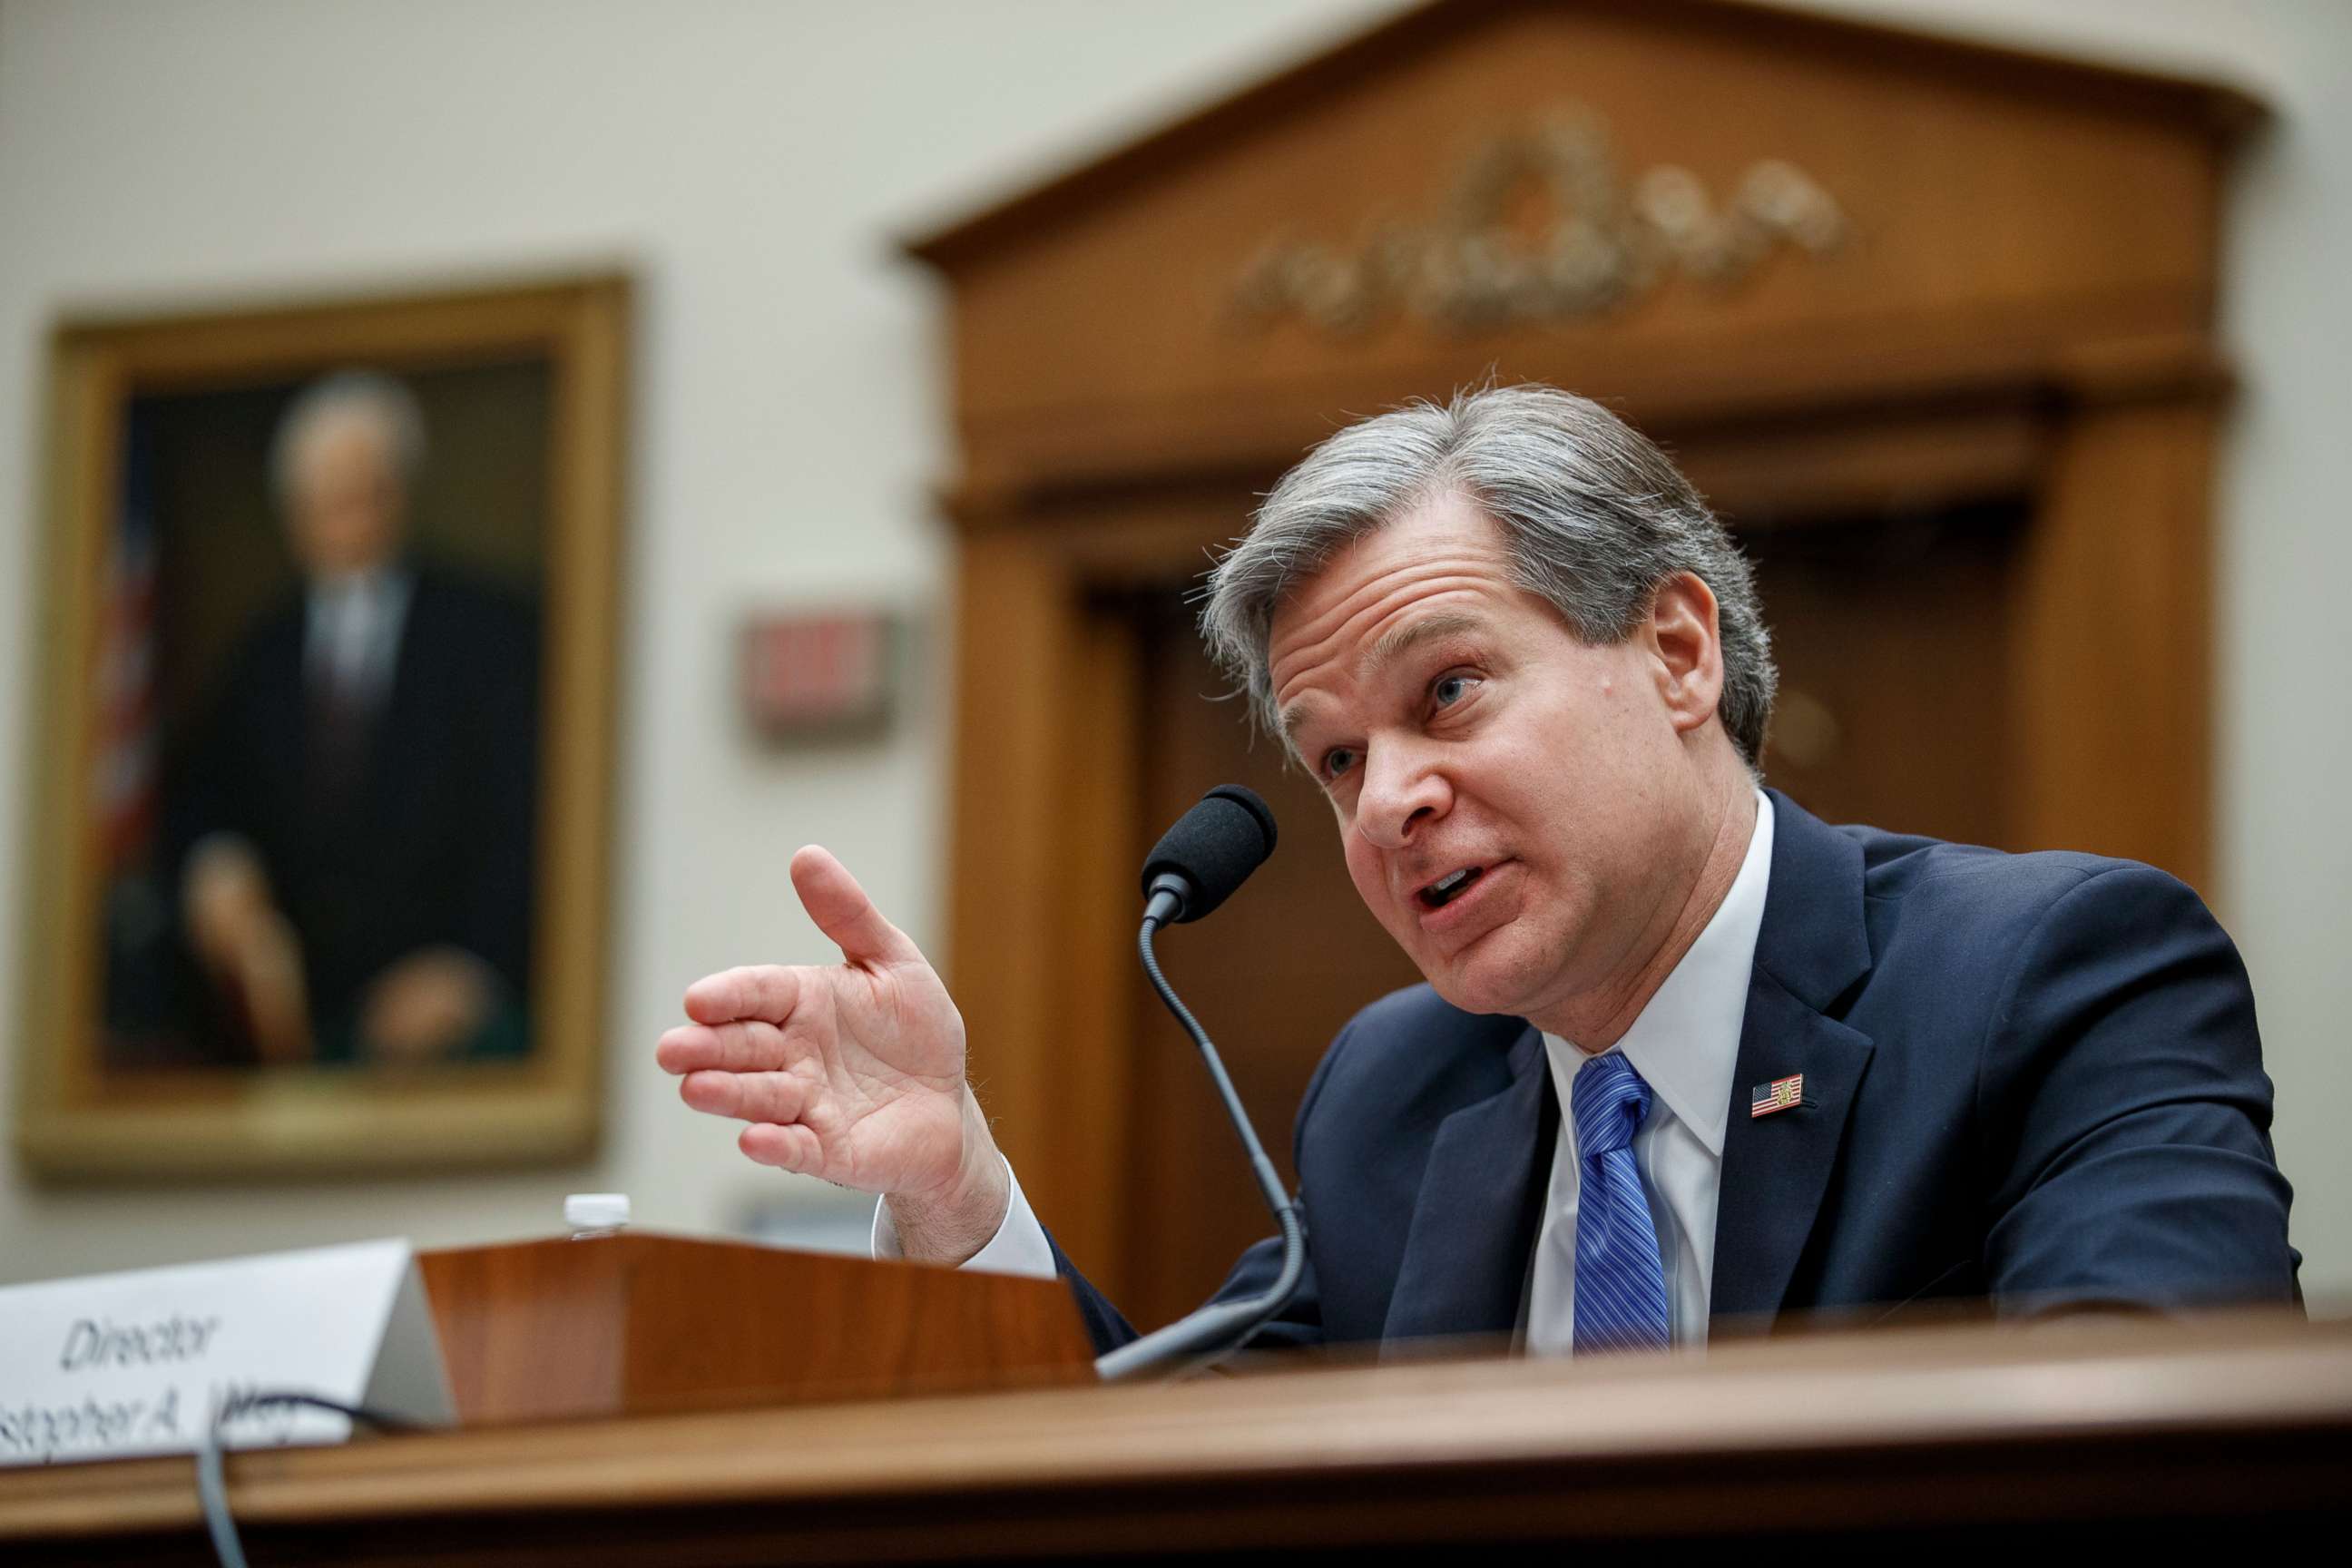 PHOTO: FBI Director Christopher Wray testifies during the House Judiciary Committee hearing on 'Oversight of the Federal Bureau of Investigation' on Capitol Hill in Washington, Feb. 2020.